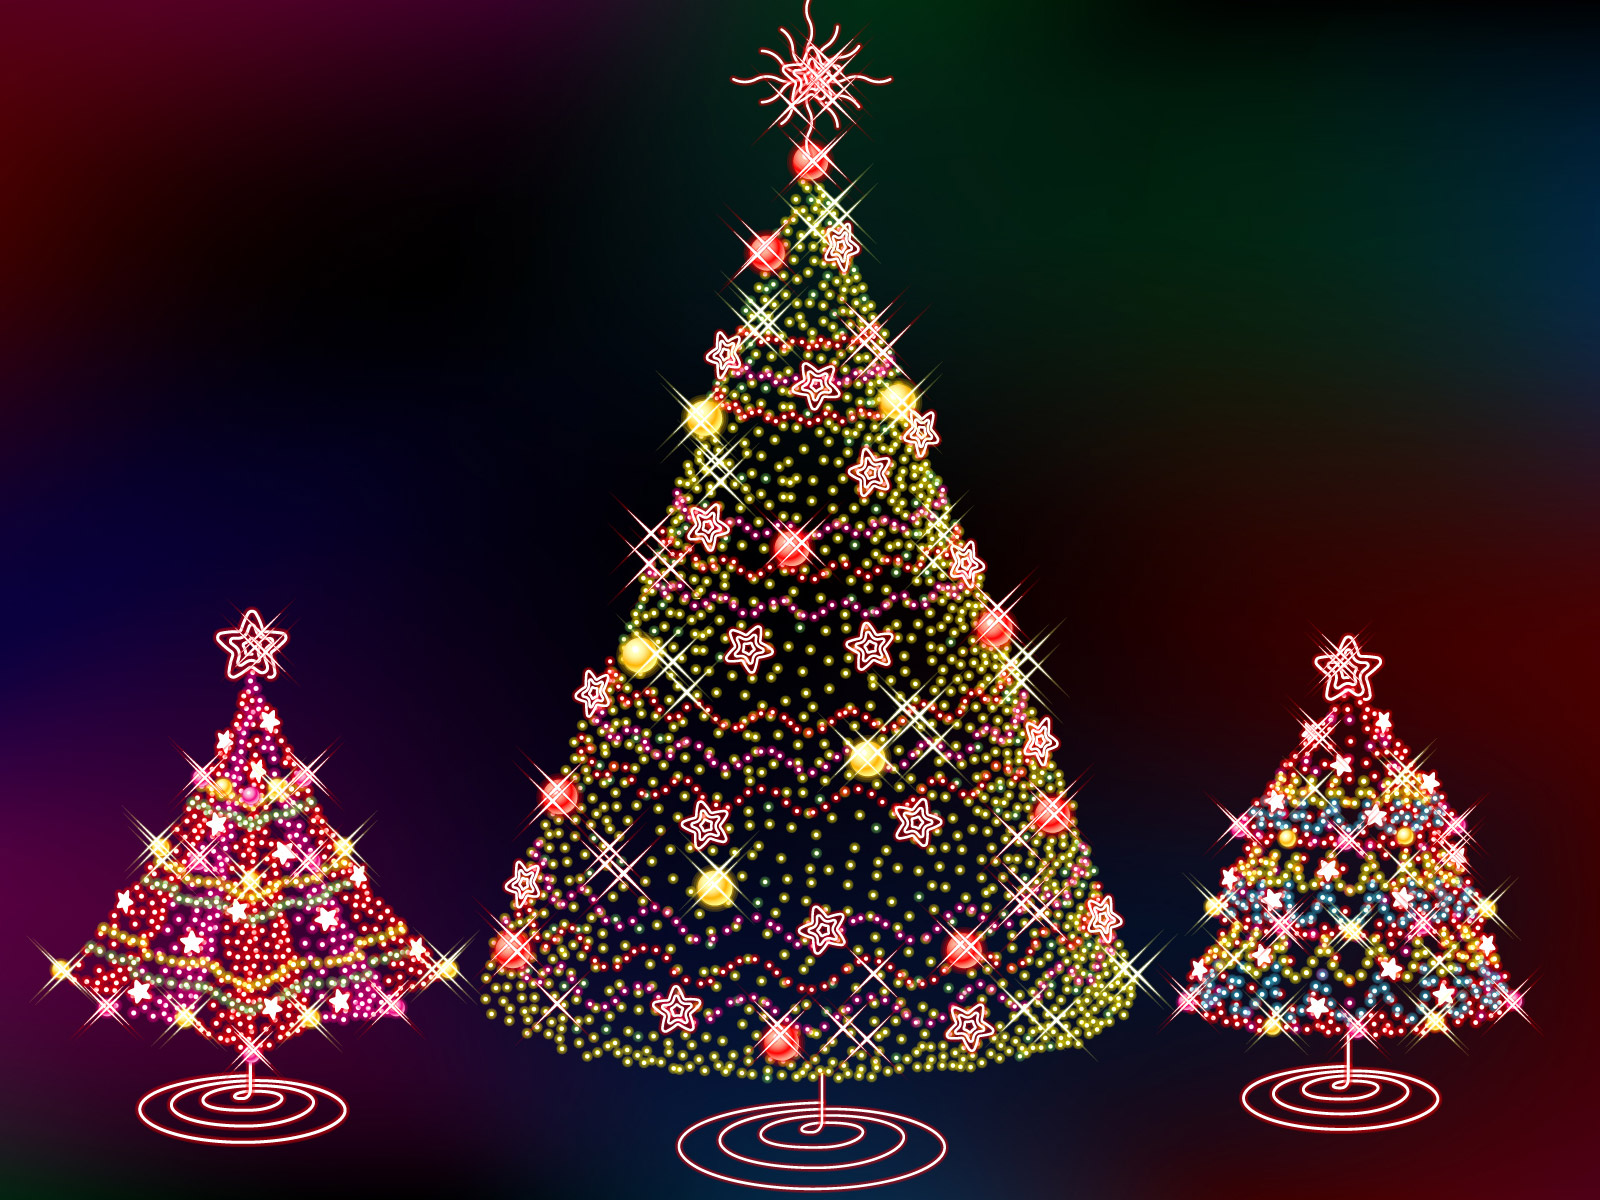 Animated Christmas Tree Backgrounds - HD Wallpaper 